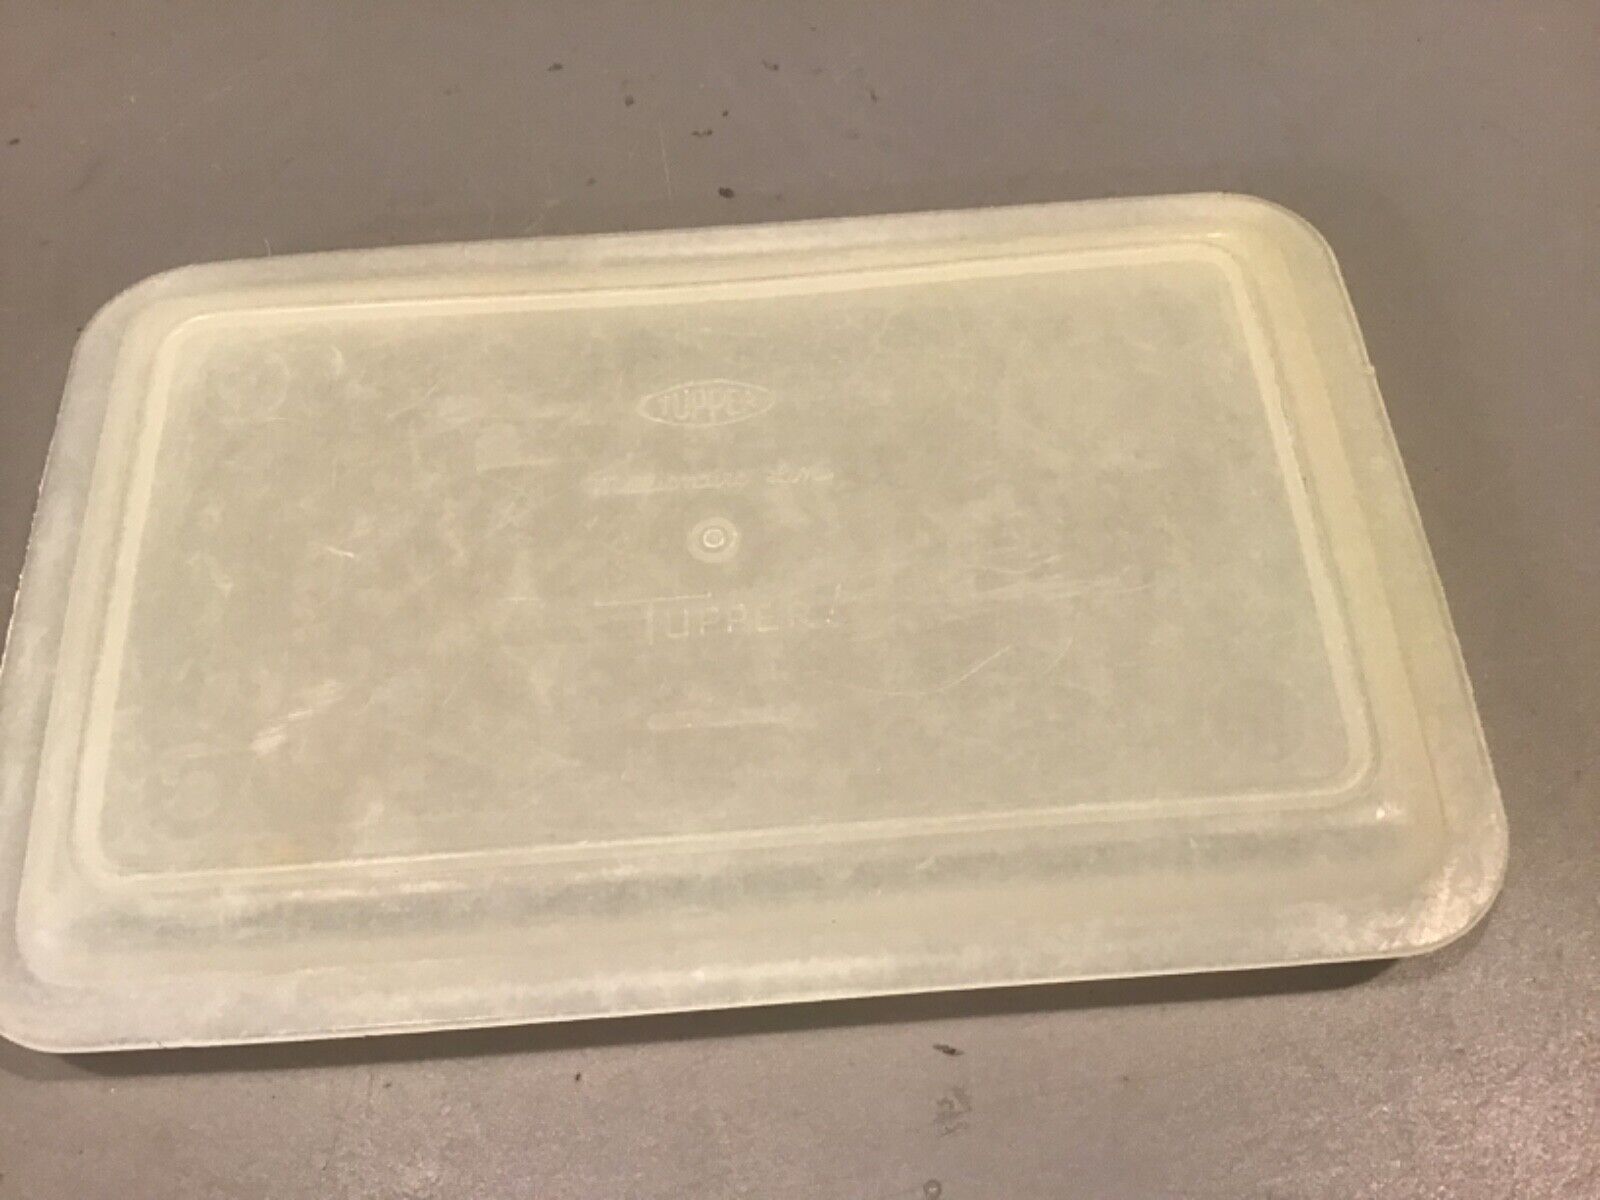 Vintage Rarely Seen“Tupper”Tupperware Lid Replacement Only 3”x5”Millionaire Line